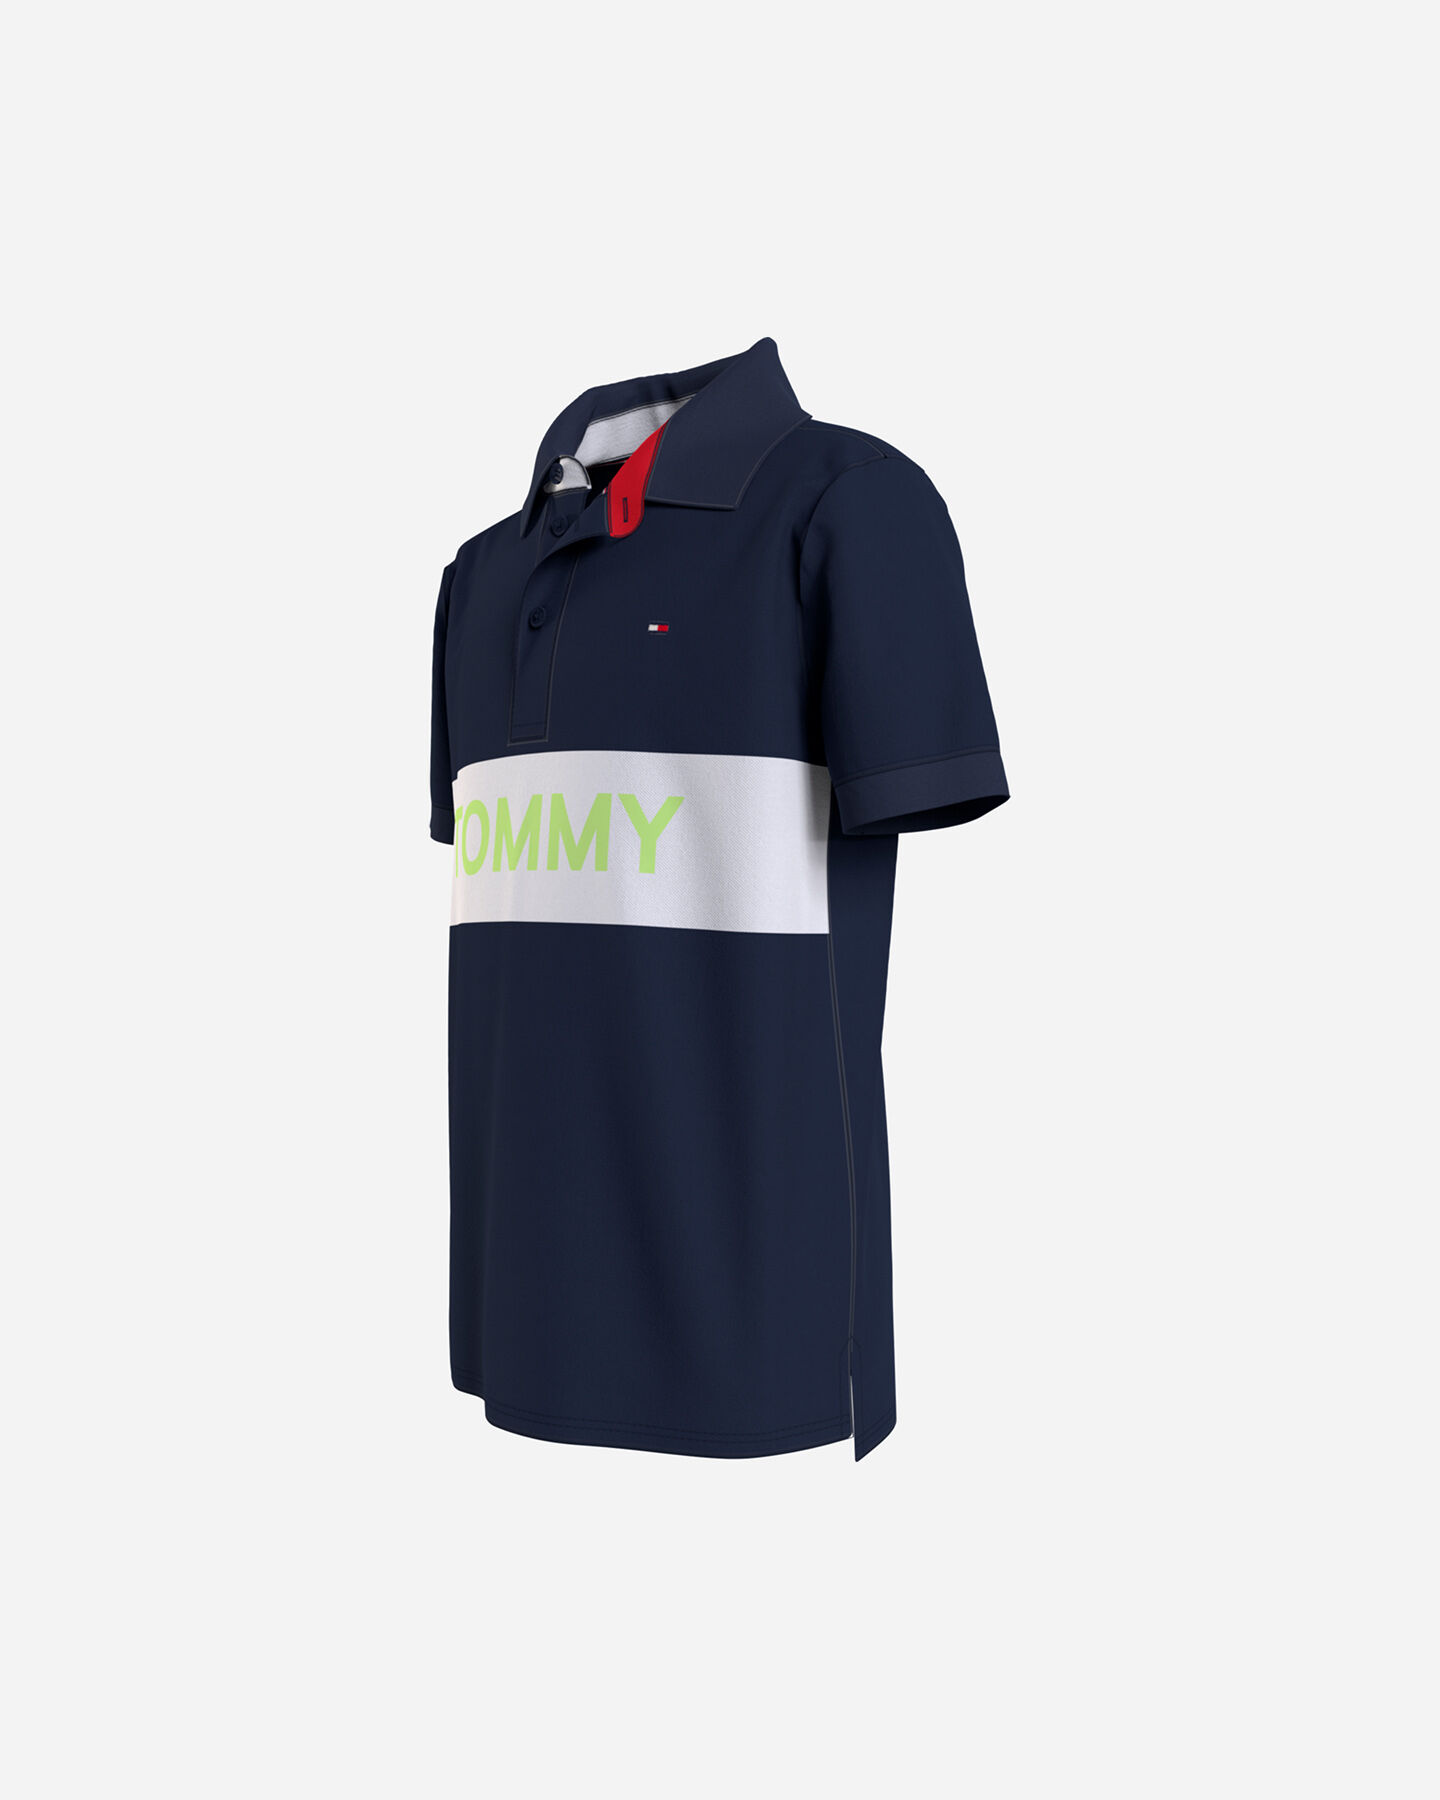  Polo TOMMY HILFIGER COLBLOCK JR S4088916|C87|8A scatto 1